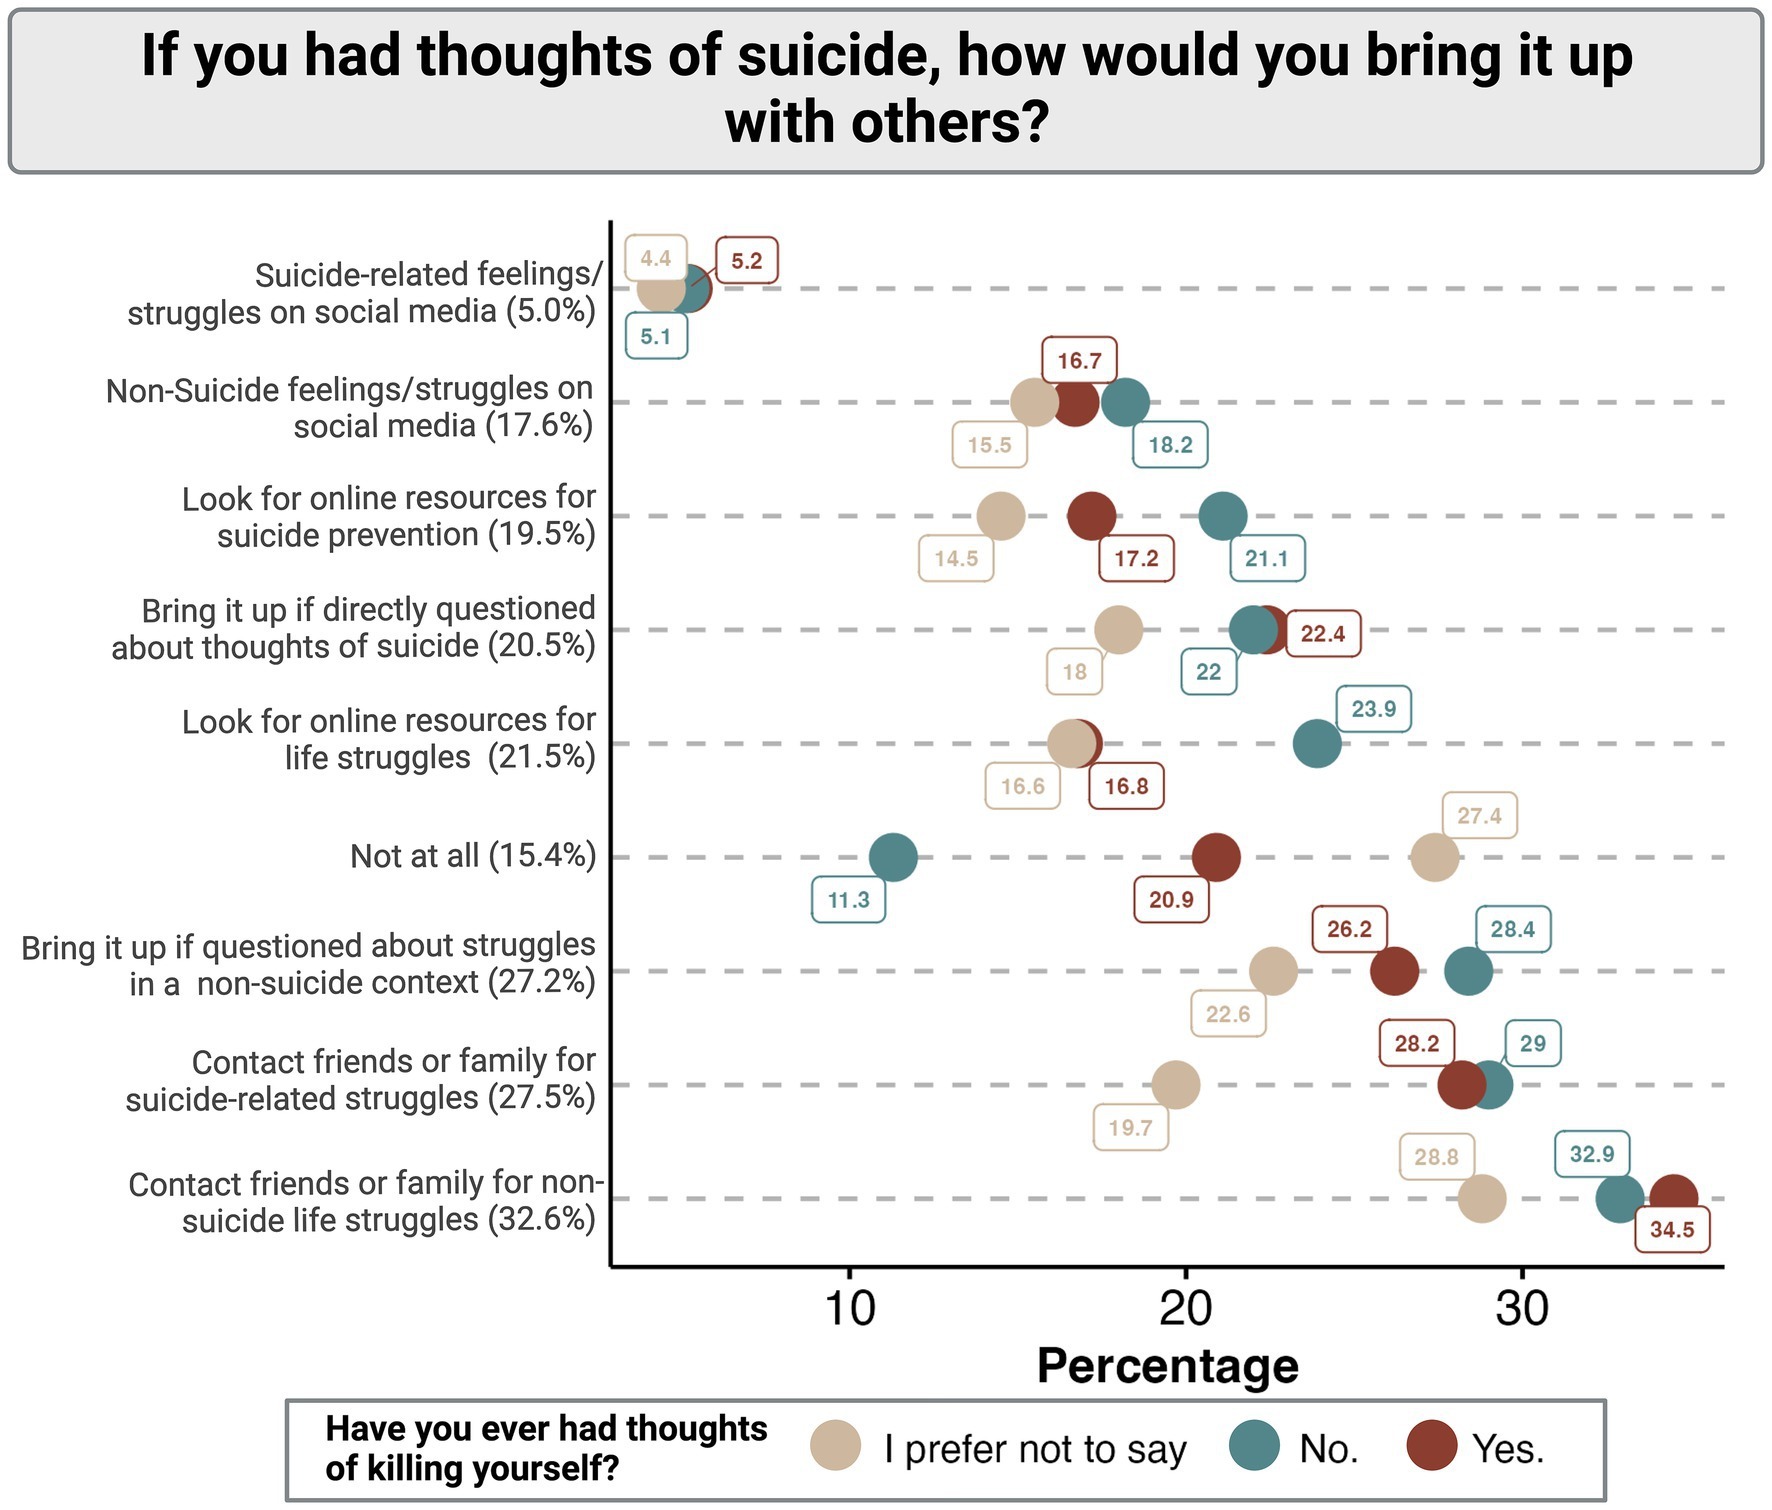 How would you bring up the topic of suicide with others?